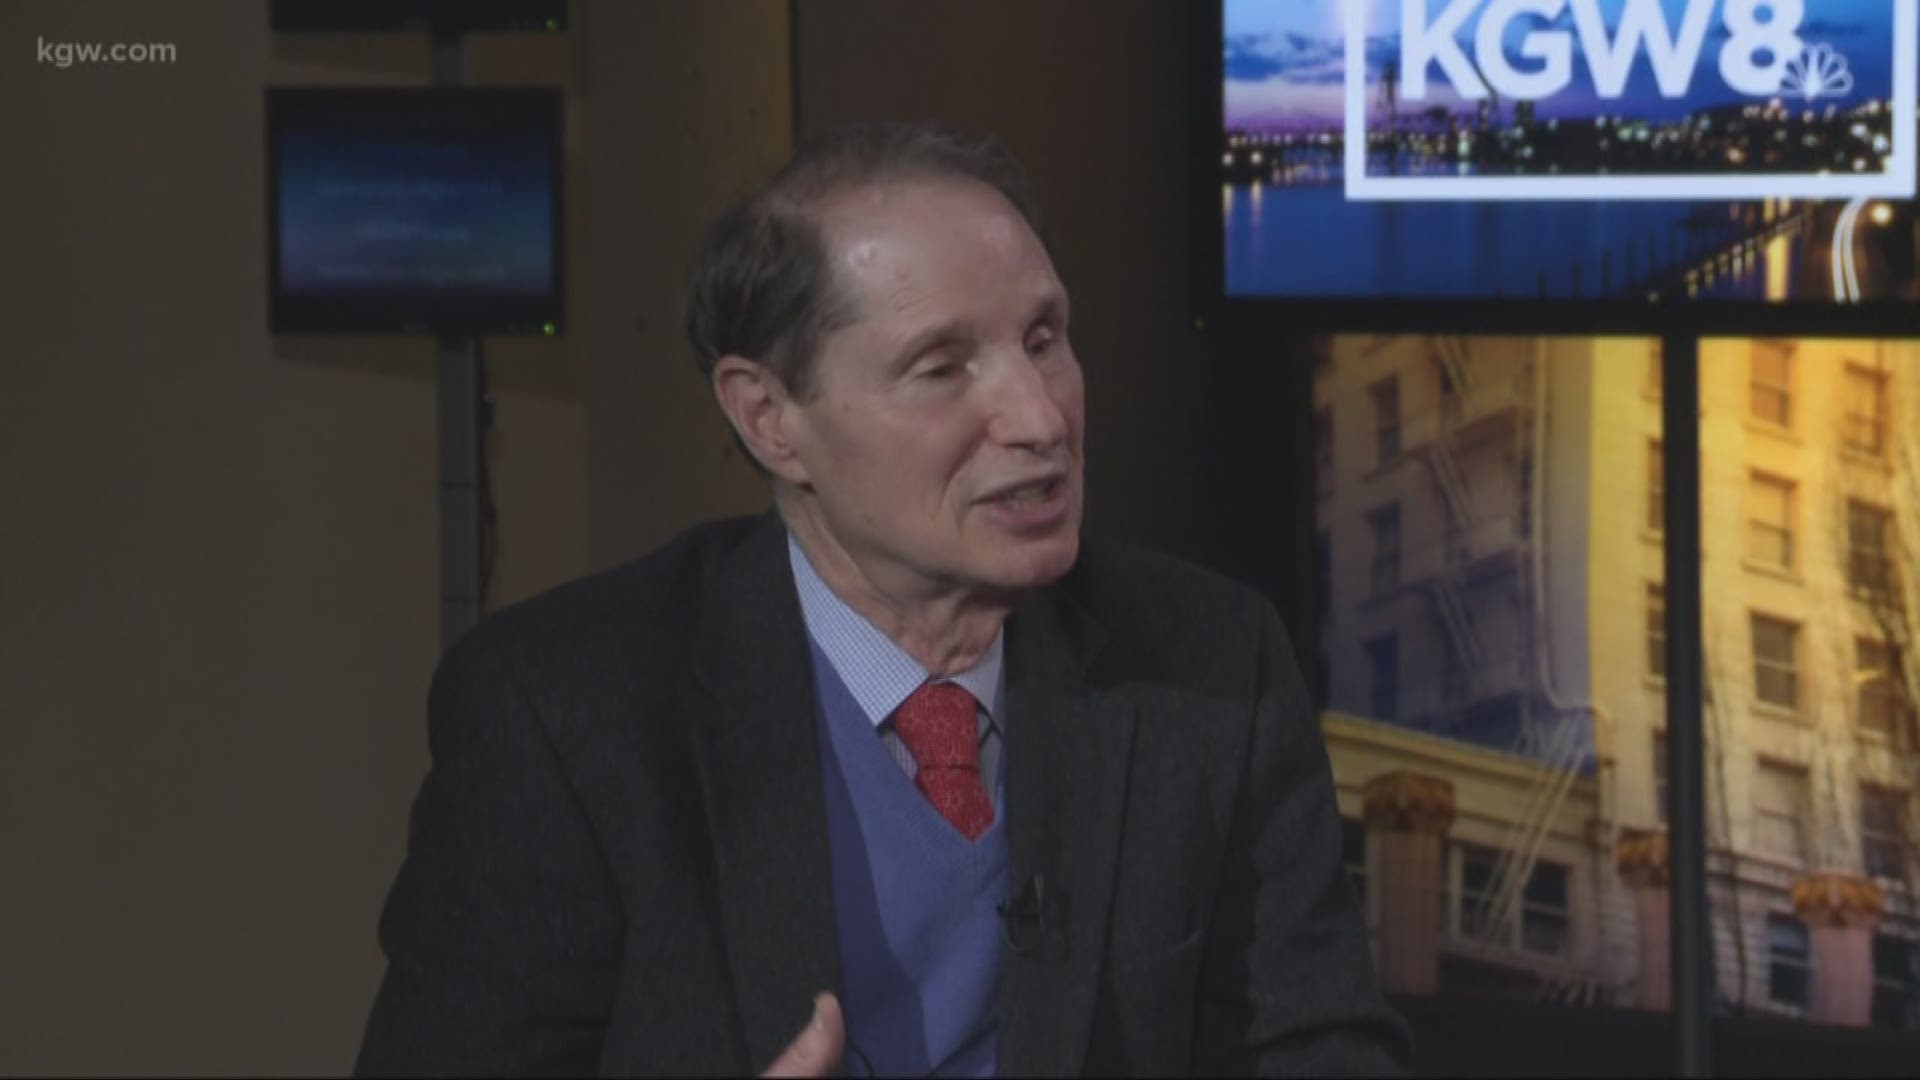 Wyden joined KGW News on Tuesday to discuss the latest on the shutdown and what Oregonians have told him at town halls across the state.